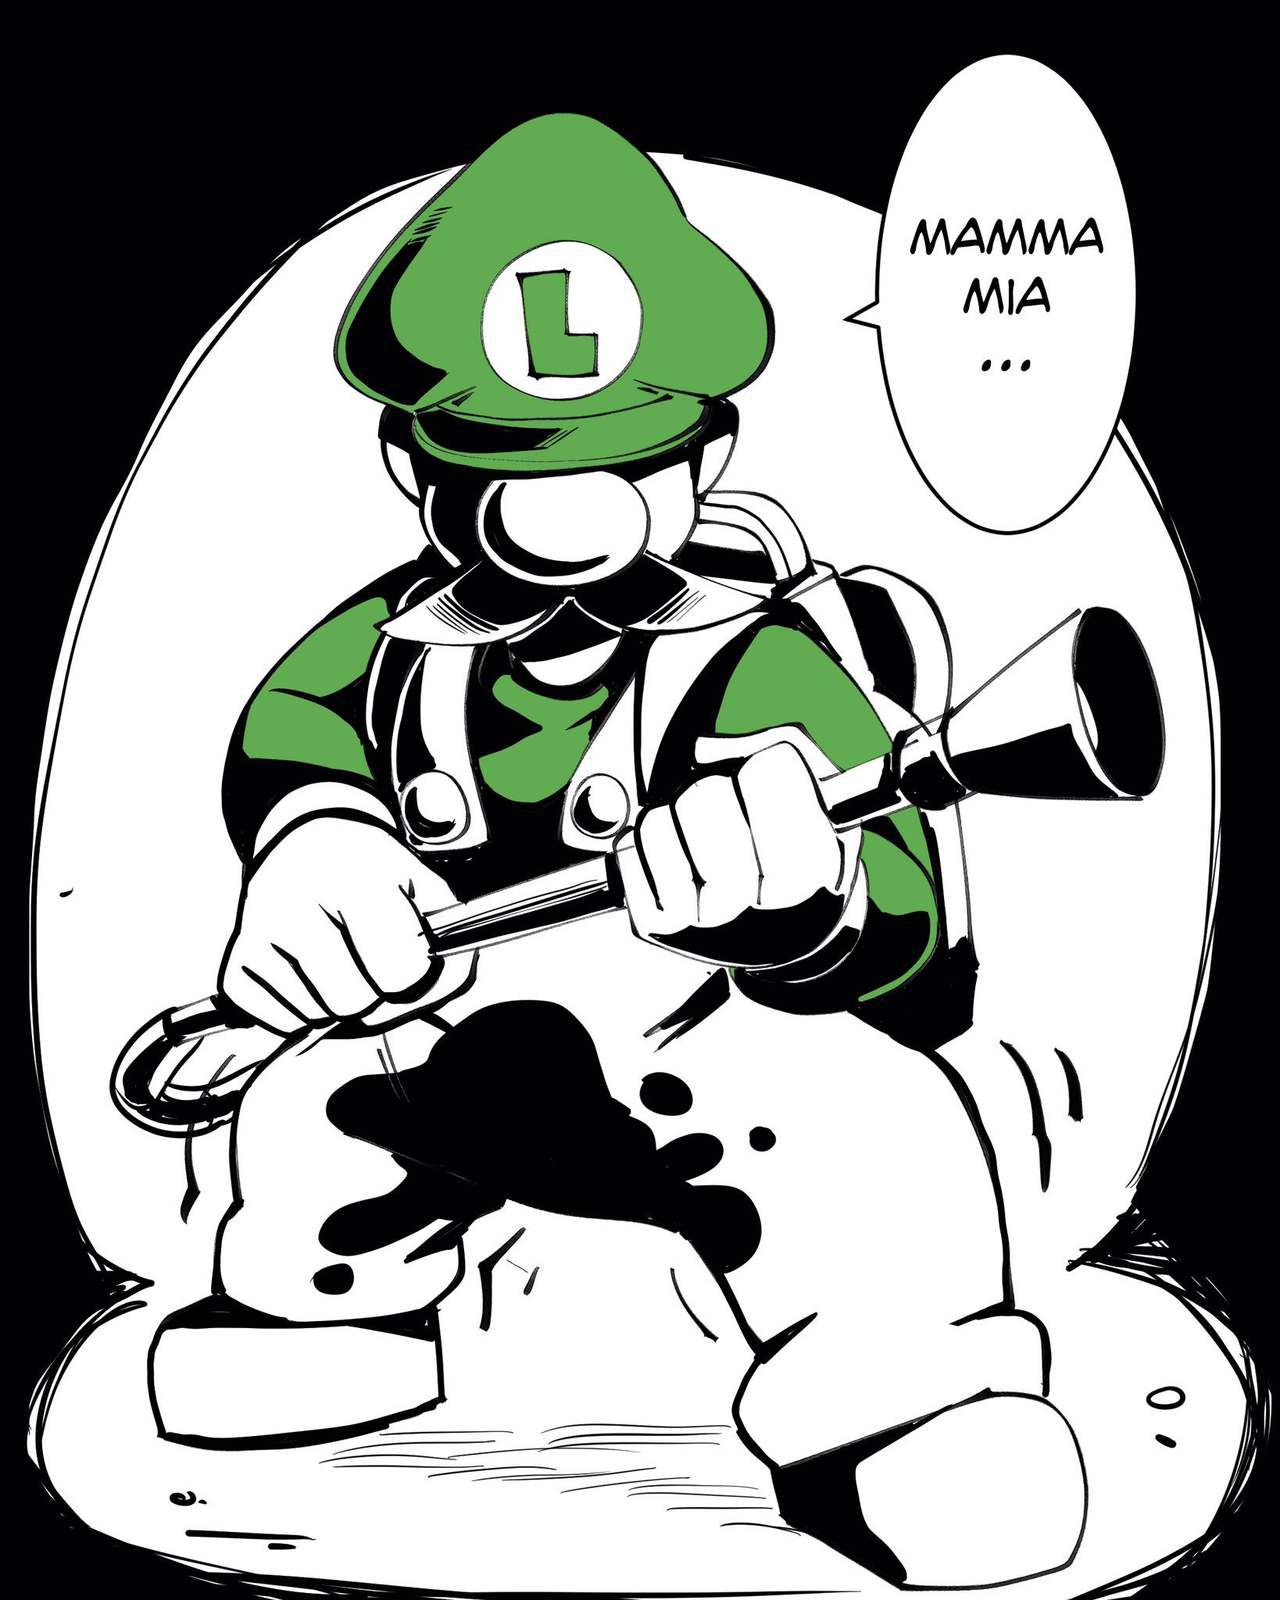 [Nisego] Inktober 2019 (Super Mario Brothers) [Ongoing] 31